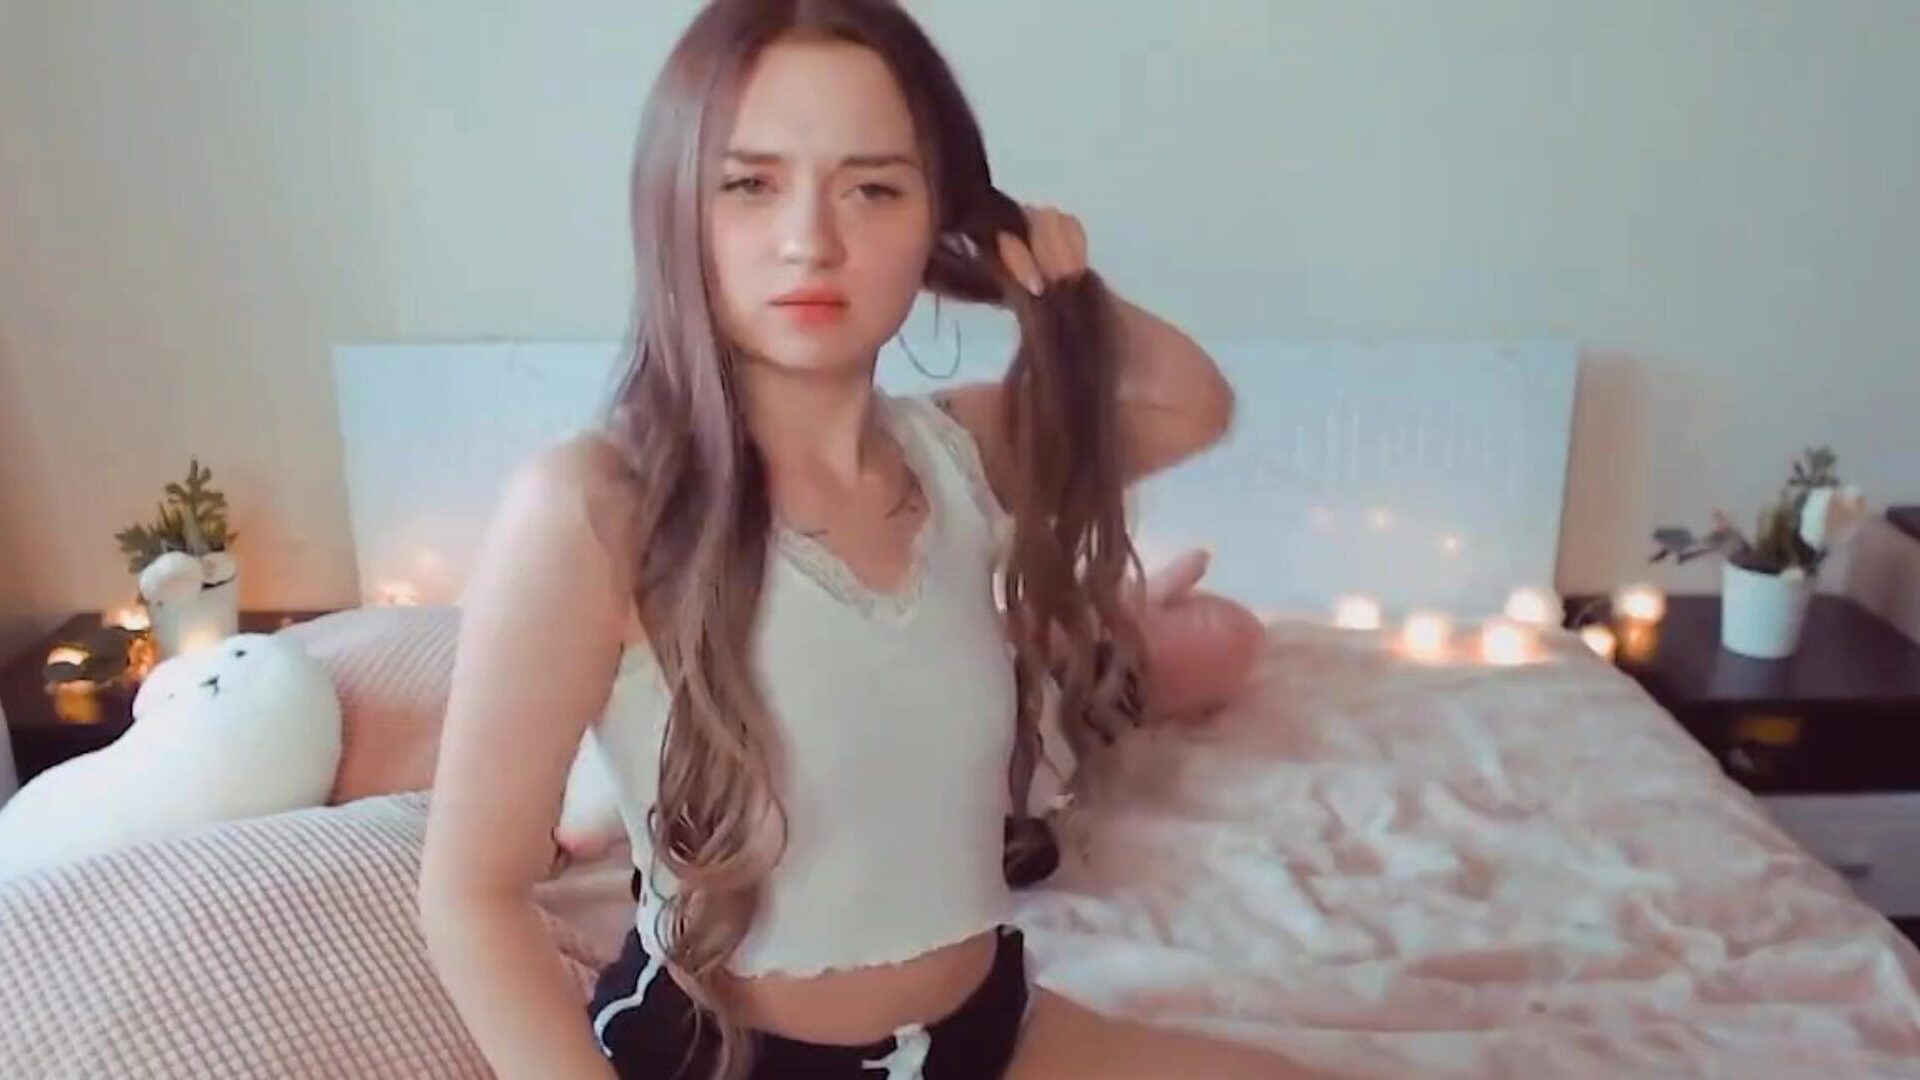 CUTE TEEN LOOKING FOR DADDY